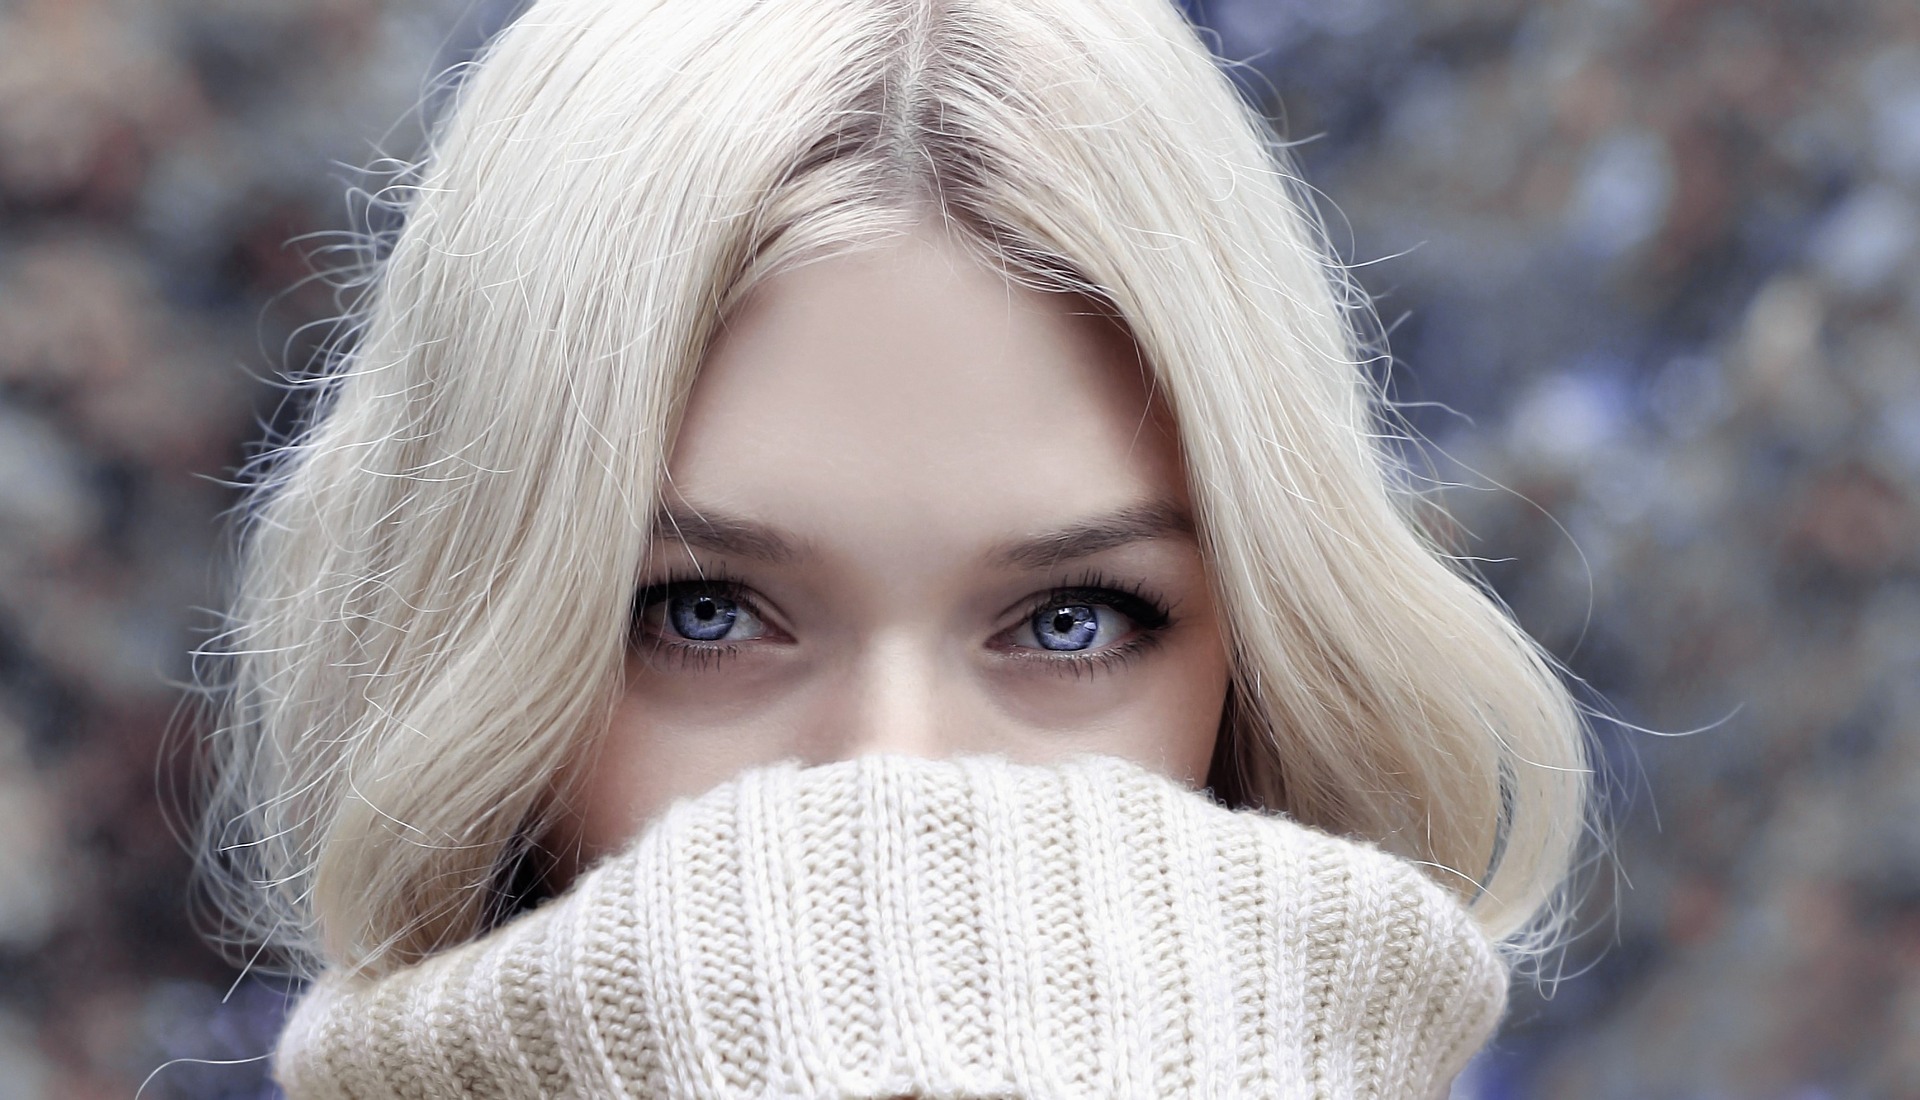 woman with sweater over her face and beautiful eyes looking over the top of it.